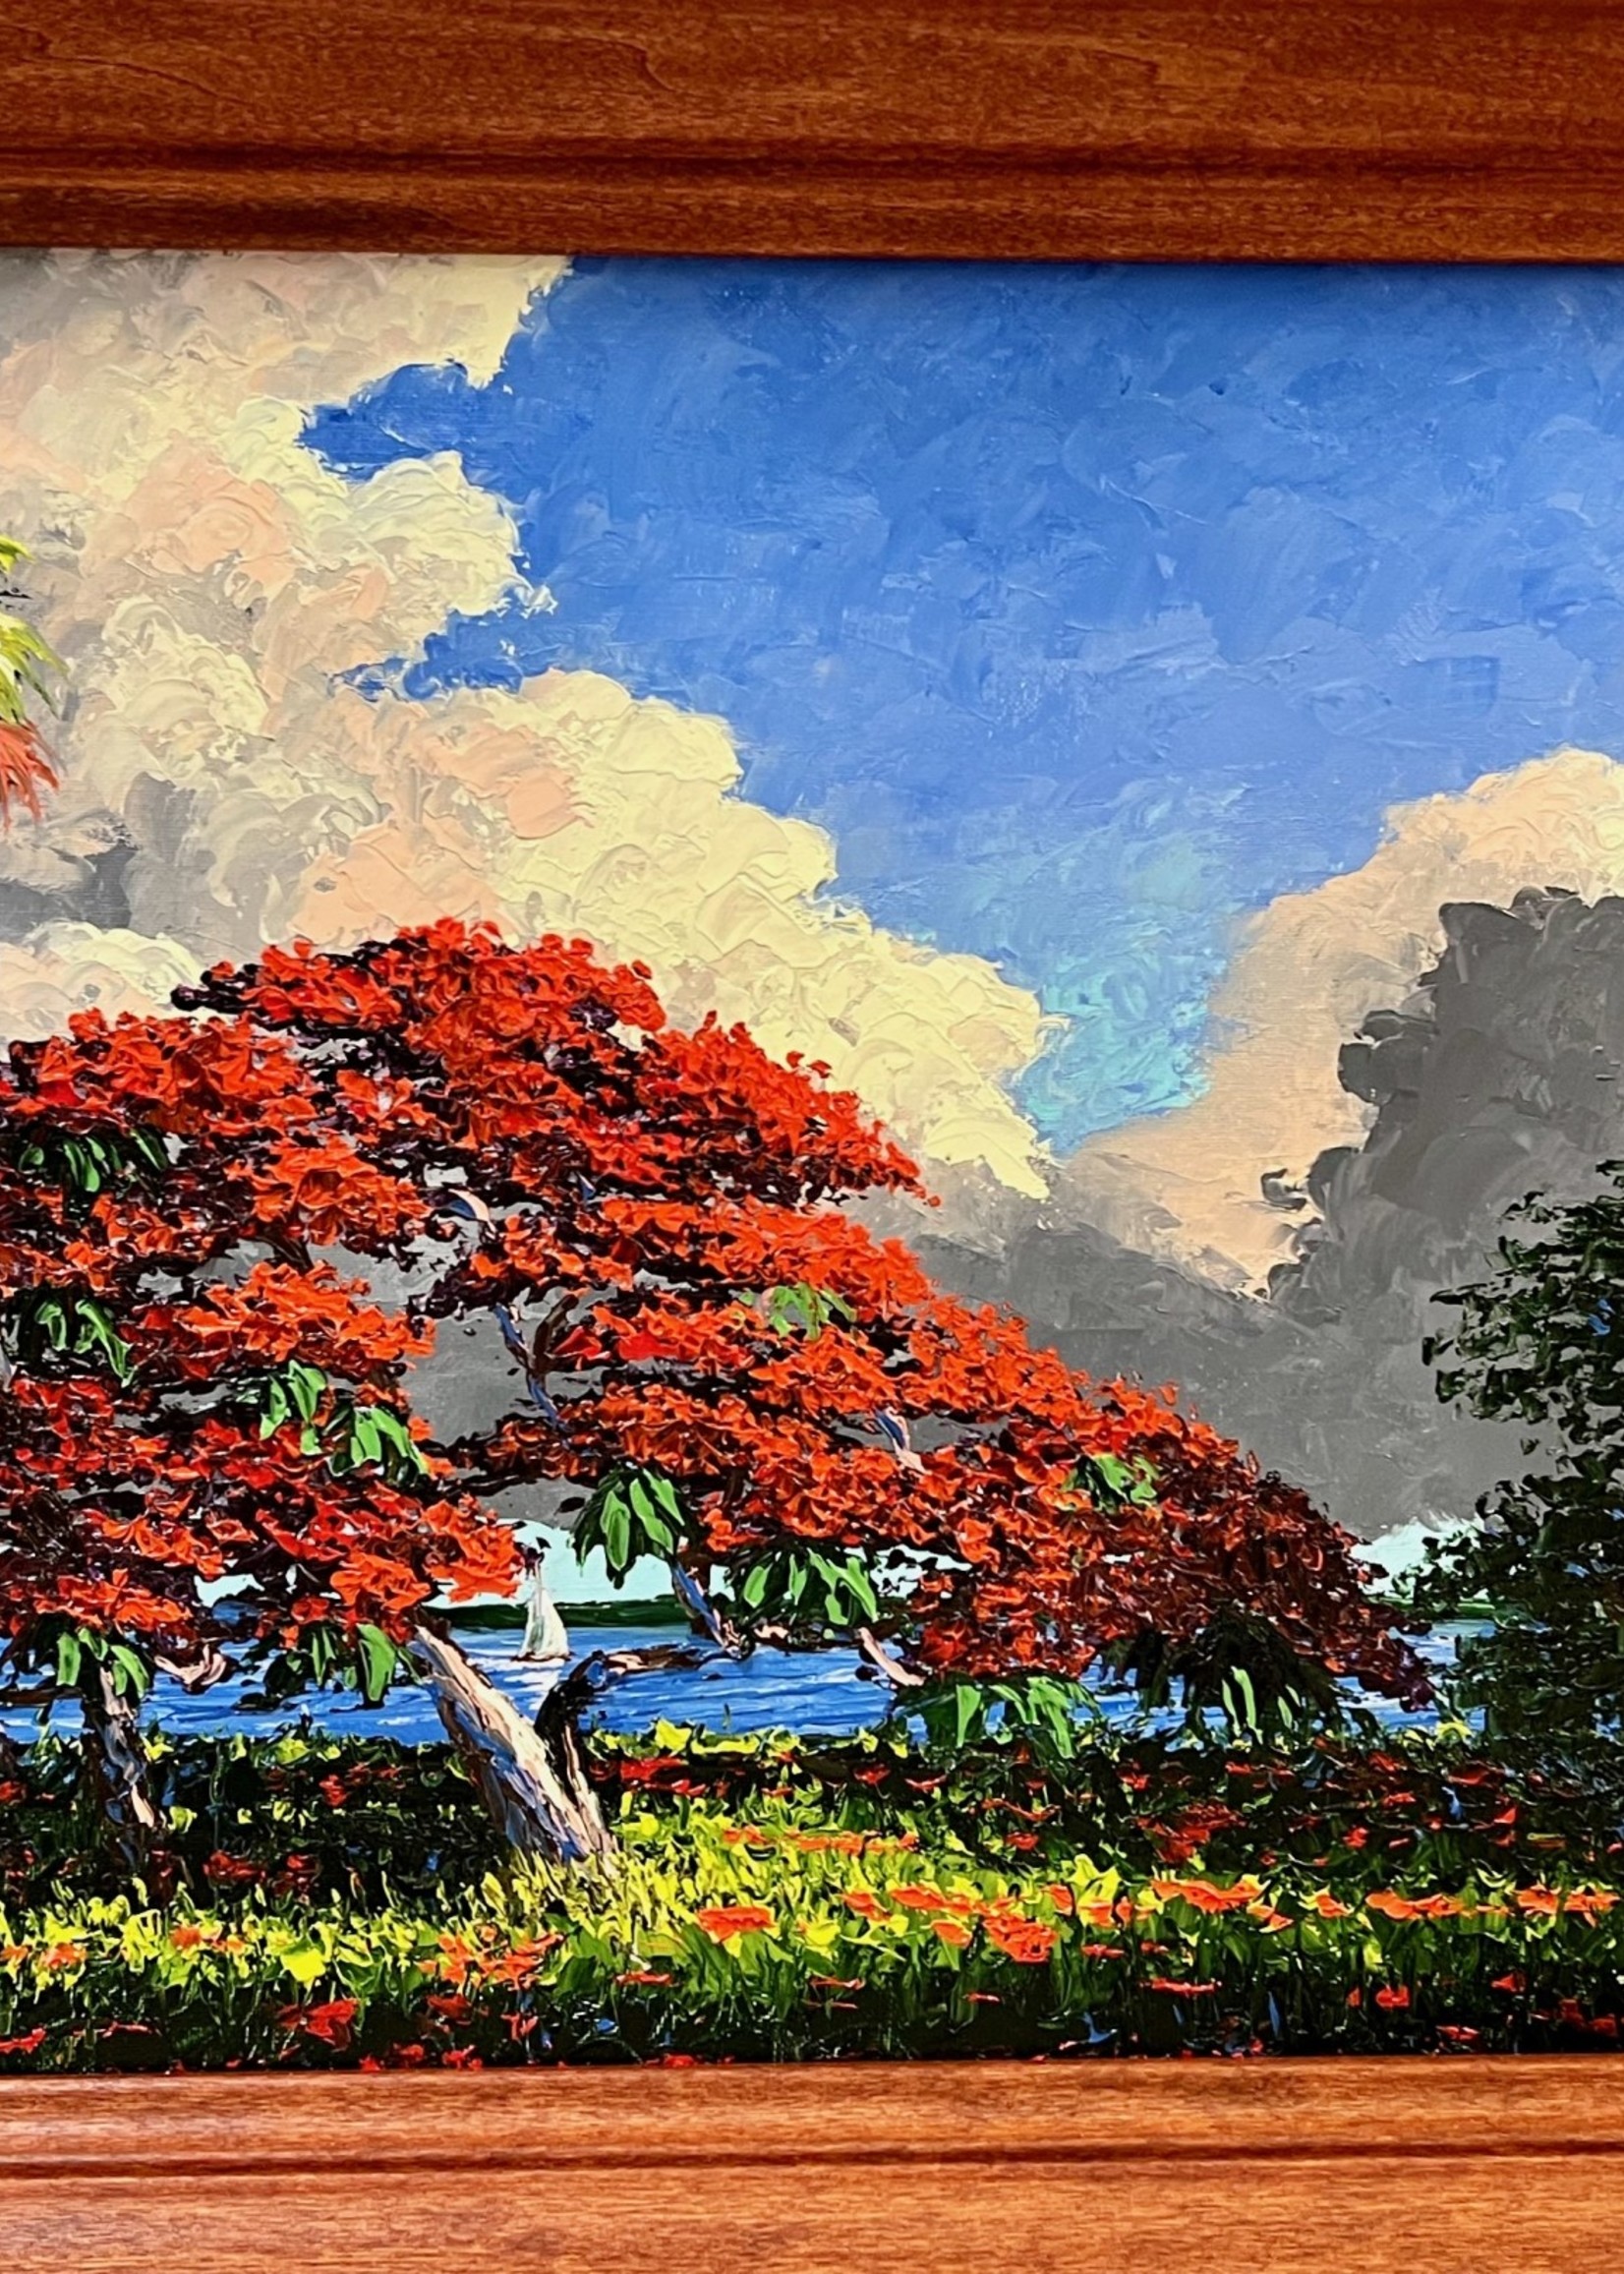 Backus, Highwaymen and Indian River School Storm Coming, Poinciana by Mark Stanford, orig oil on canvas, framed 23x20", RARE